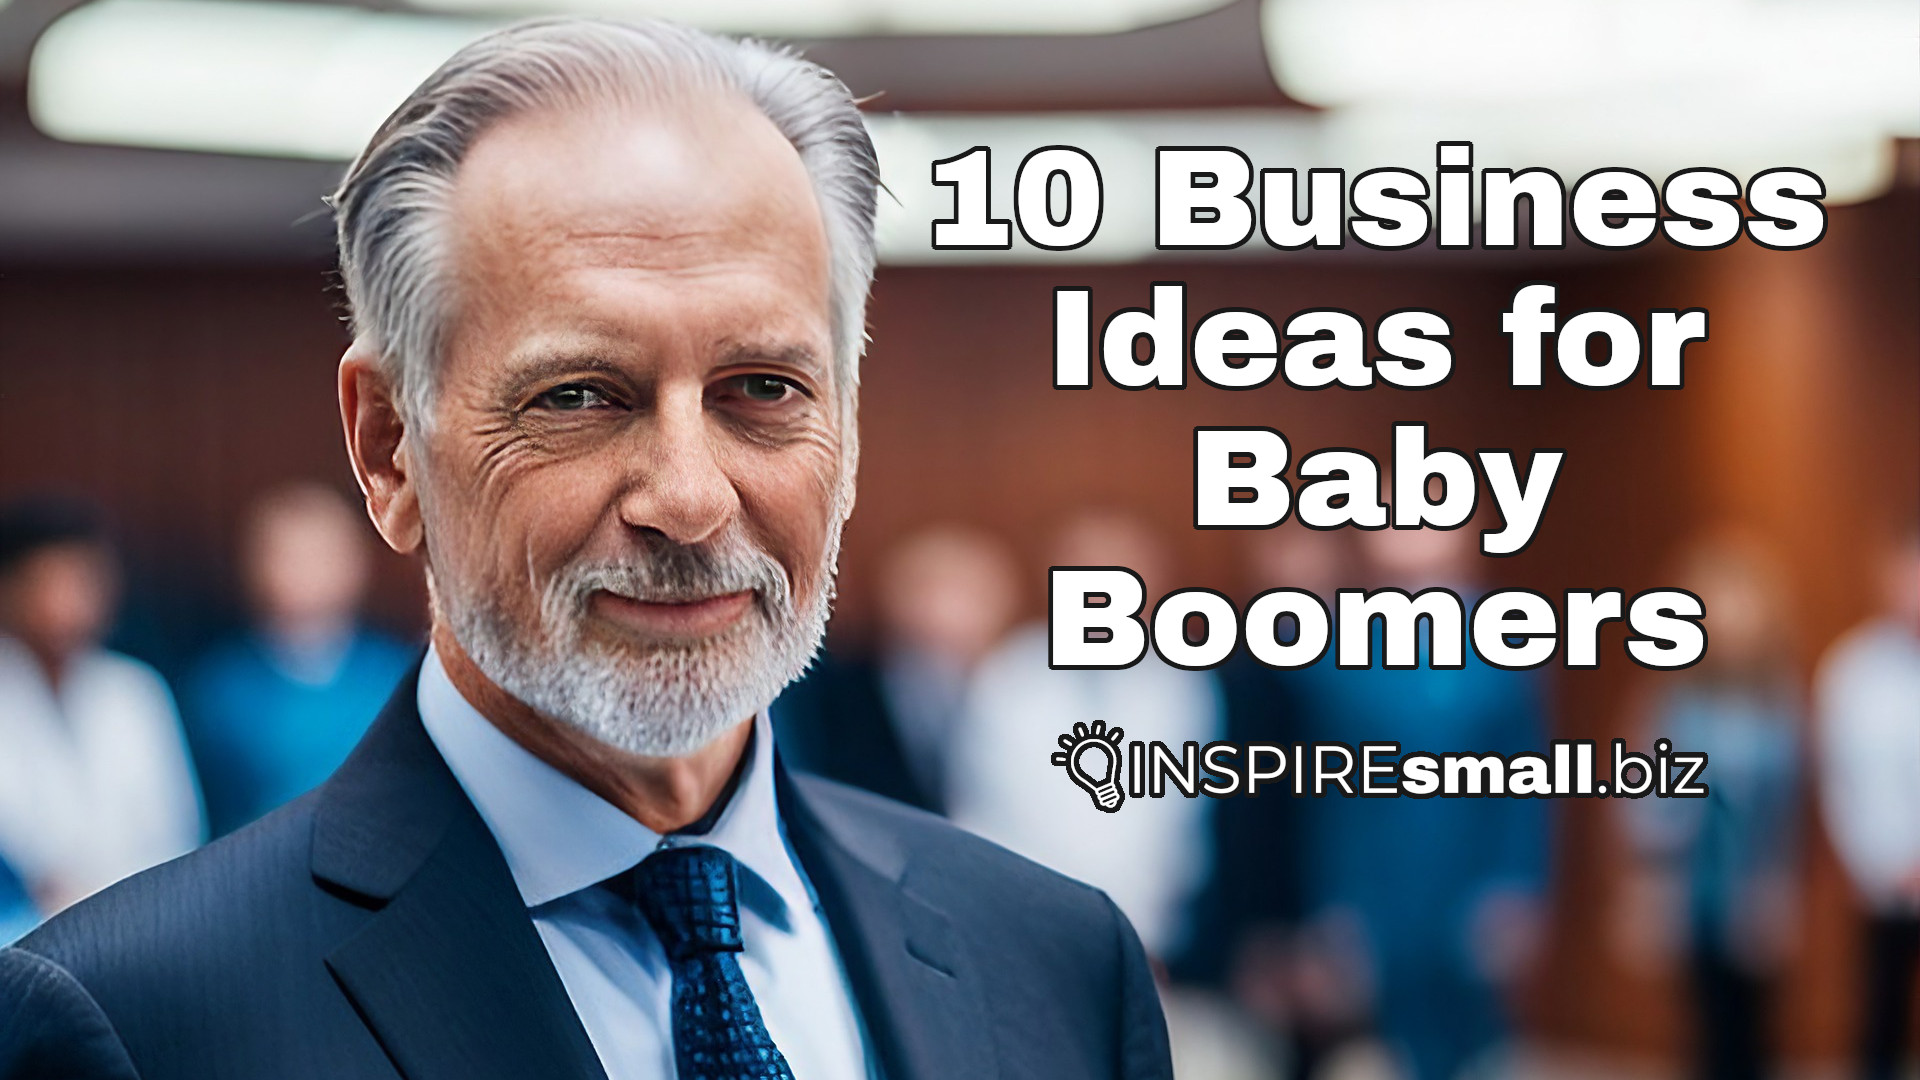 10 Business Ideas for Baby Boomers: Navigating Entrepreneurship in the Golden Years